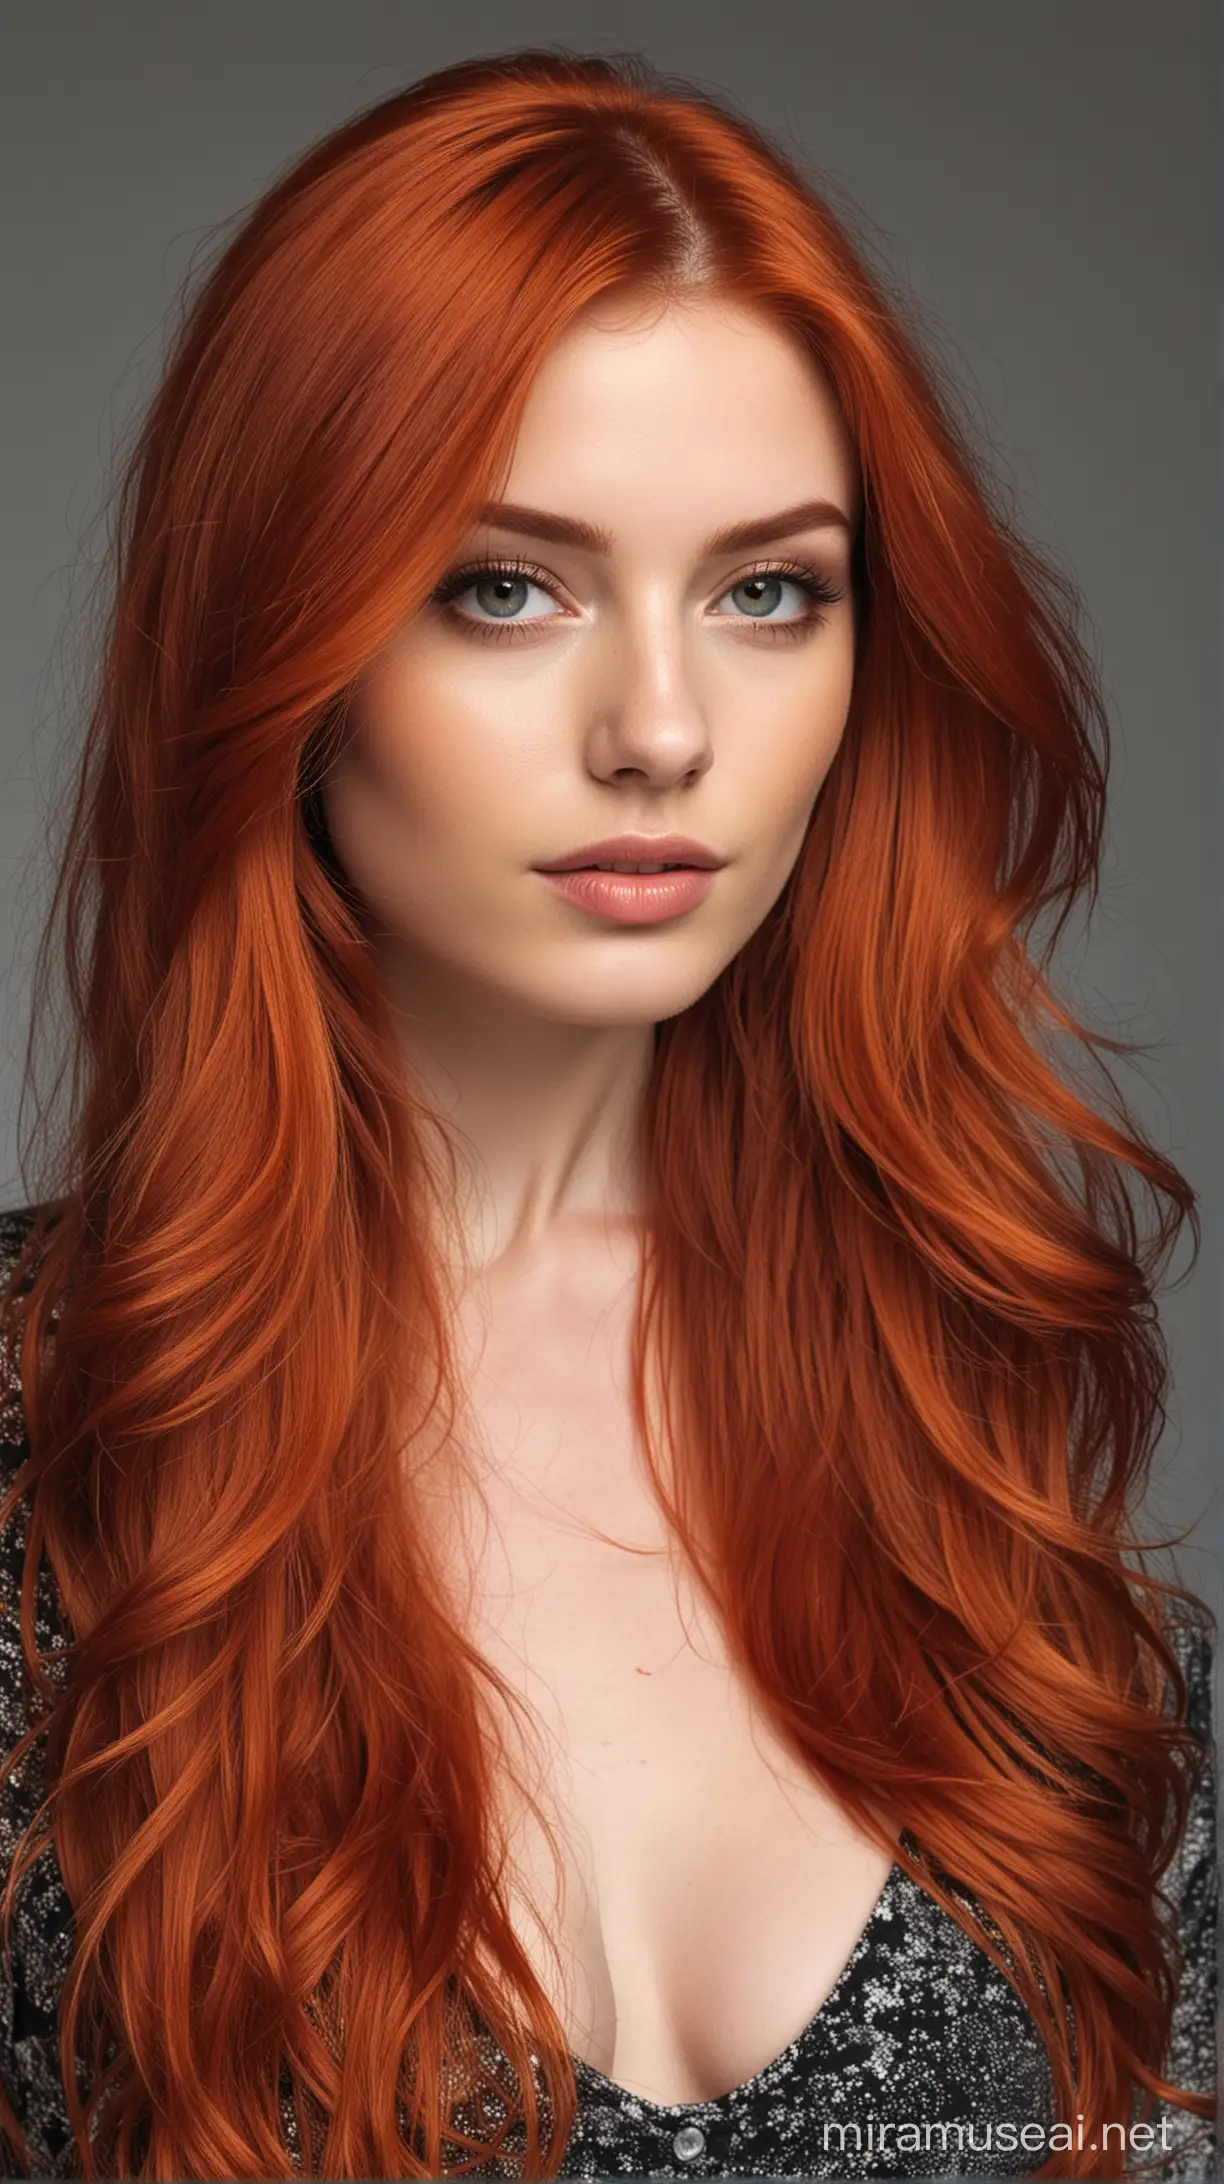 Stunning Copper RedHaired Model in Natures Embrace